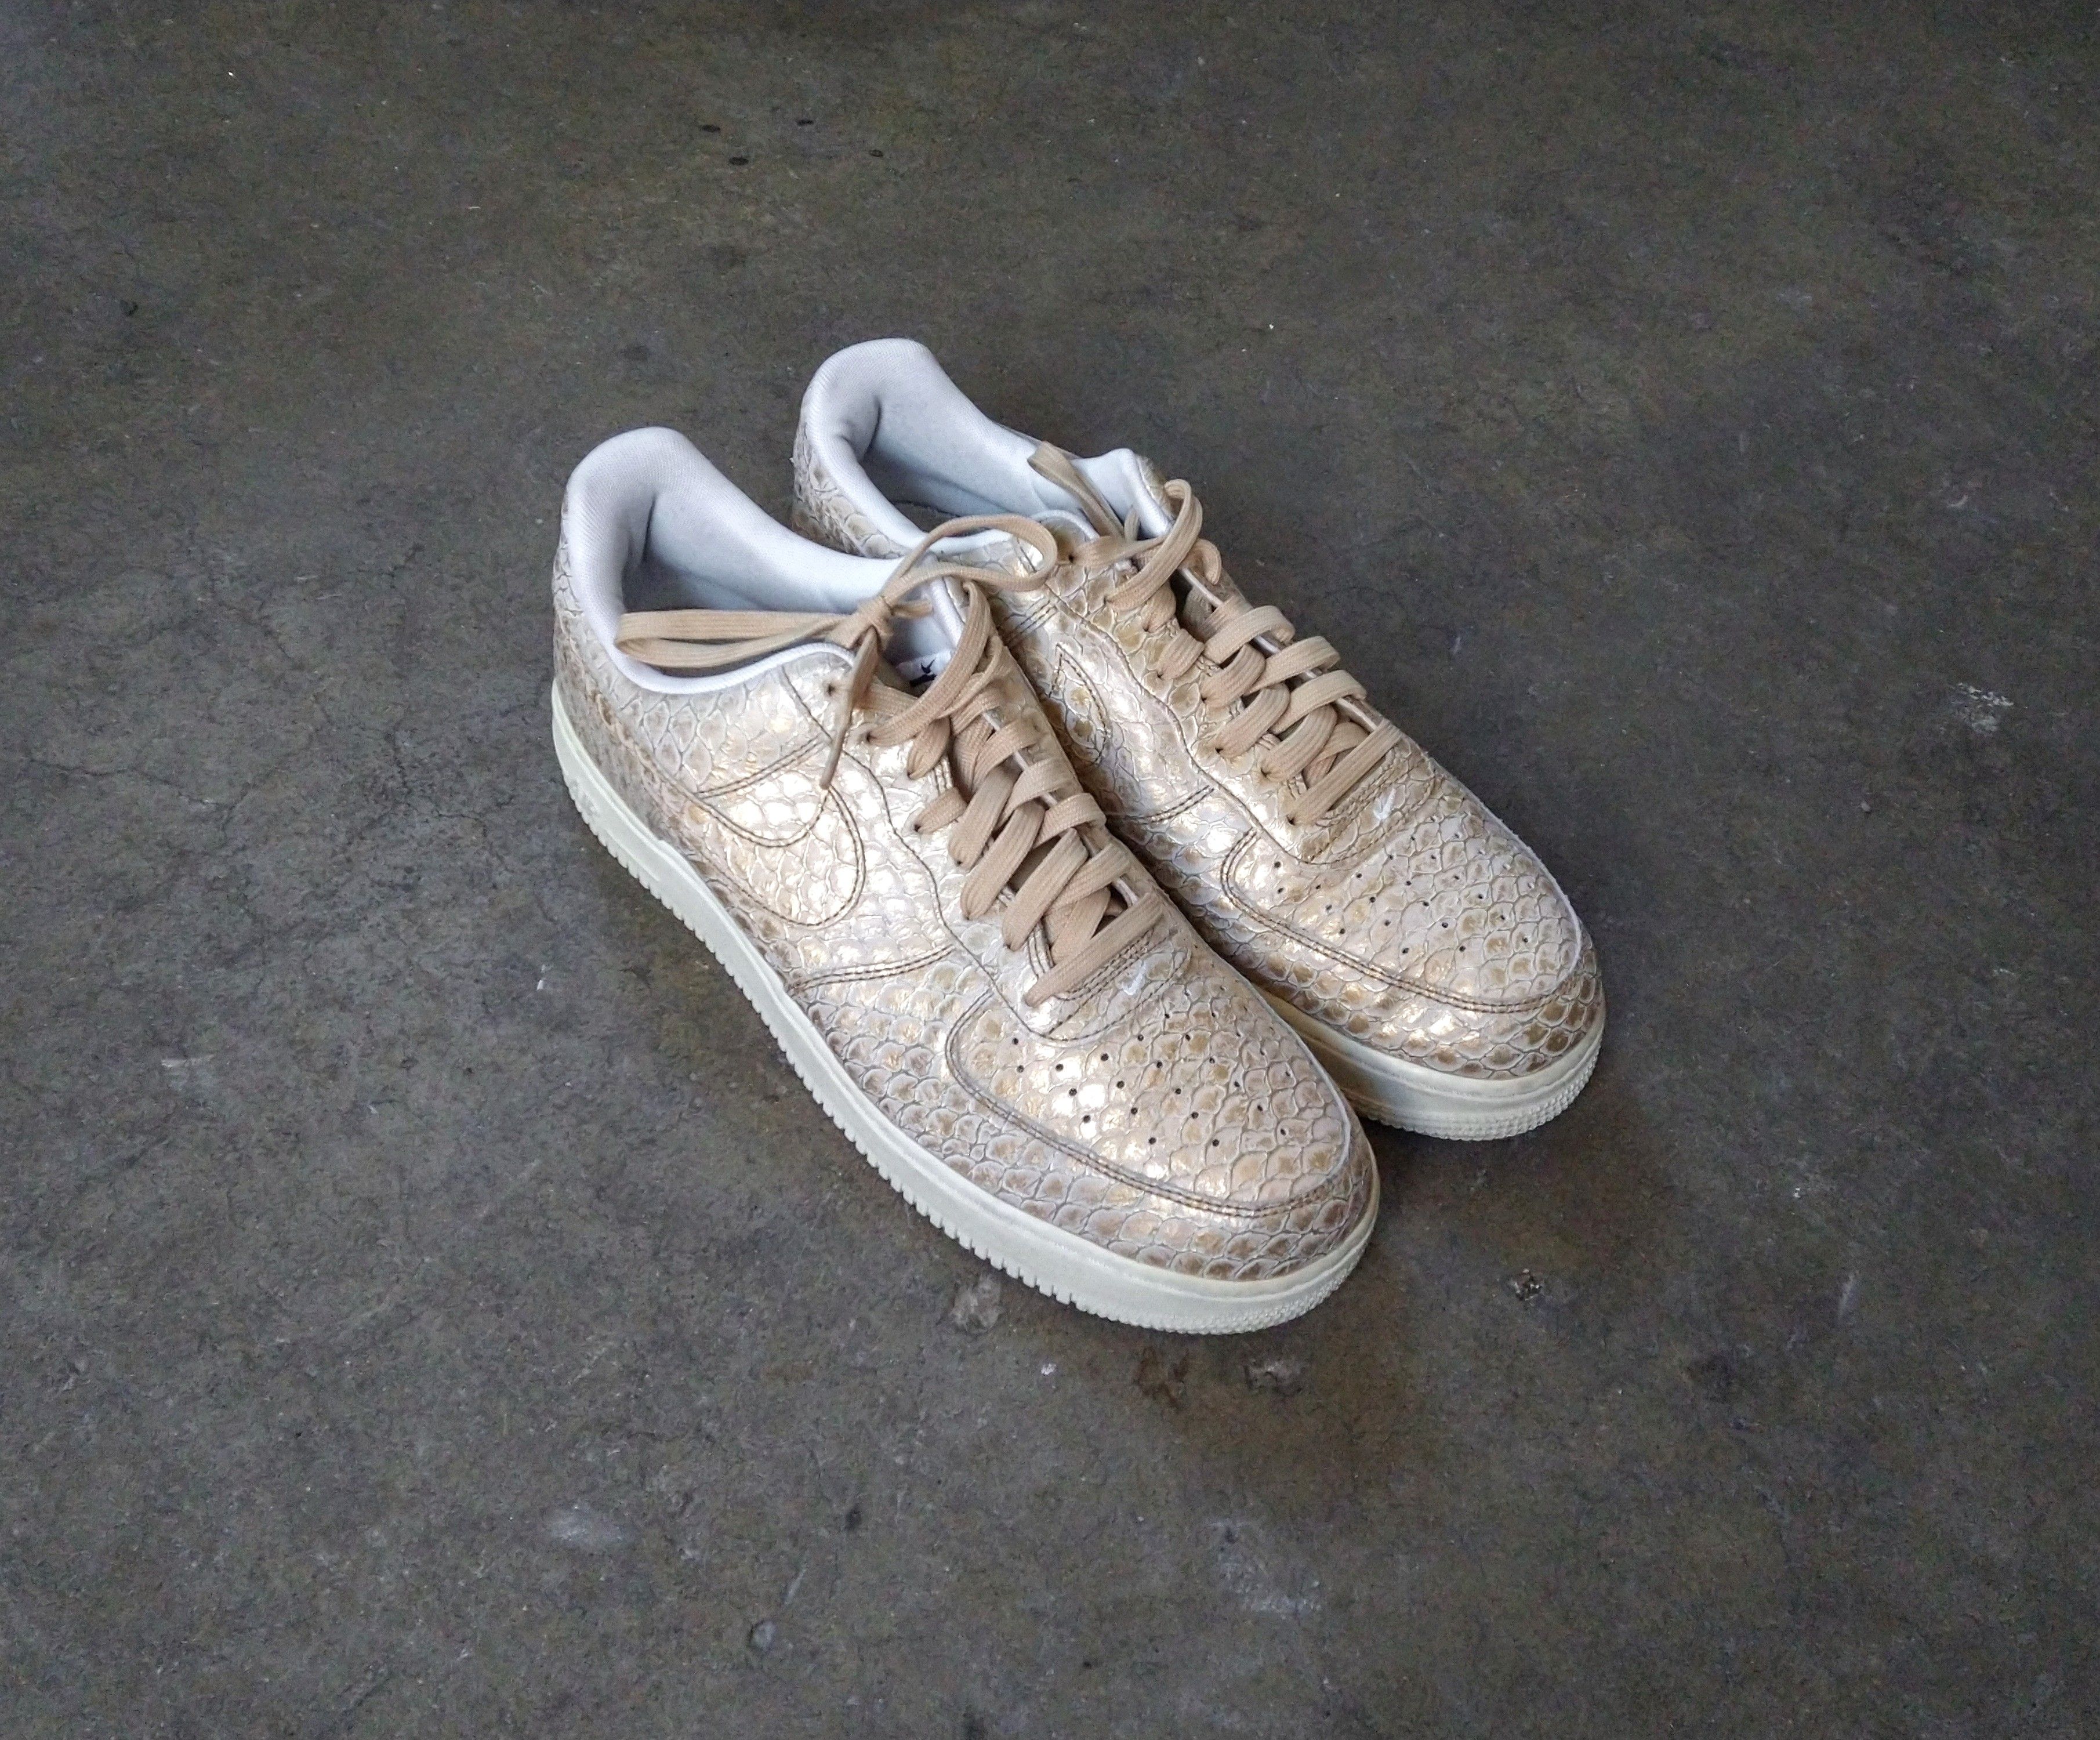 Nike Air Force 1 Low '07 LV8 Golden Scales Snake Piranha 718152